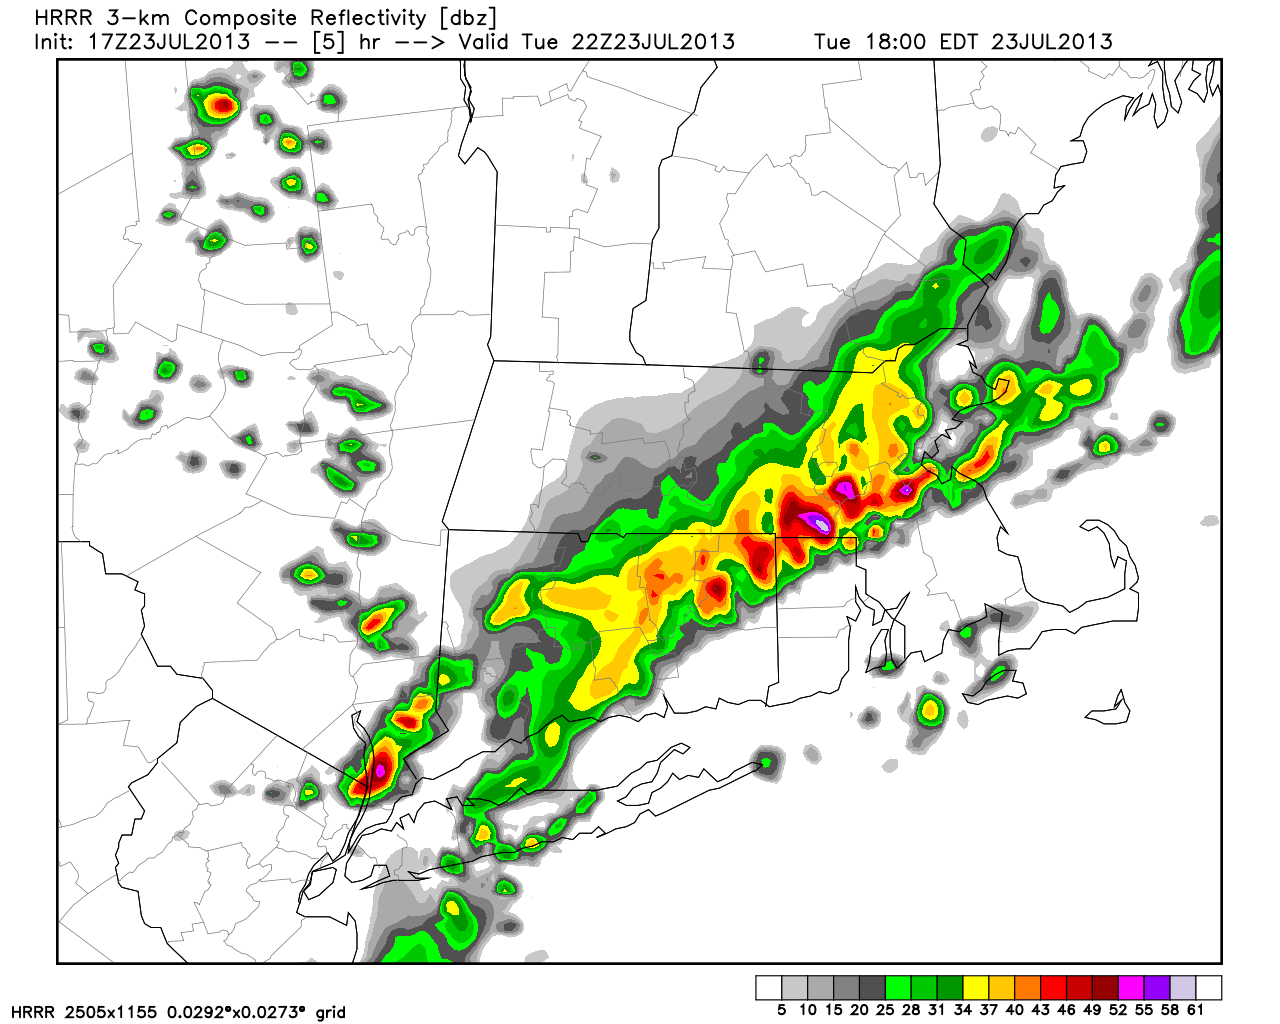 Short range computer models shows more thunderstorm from late afternoon through early evening. weatherbell.com